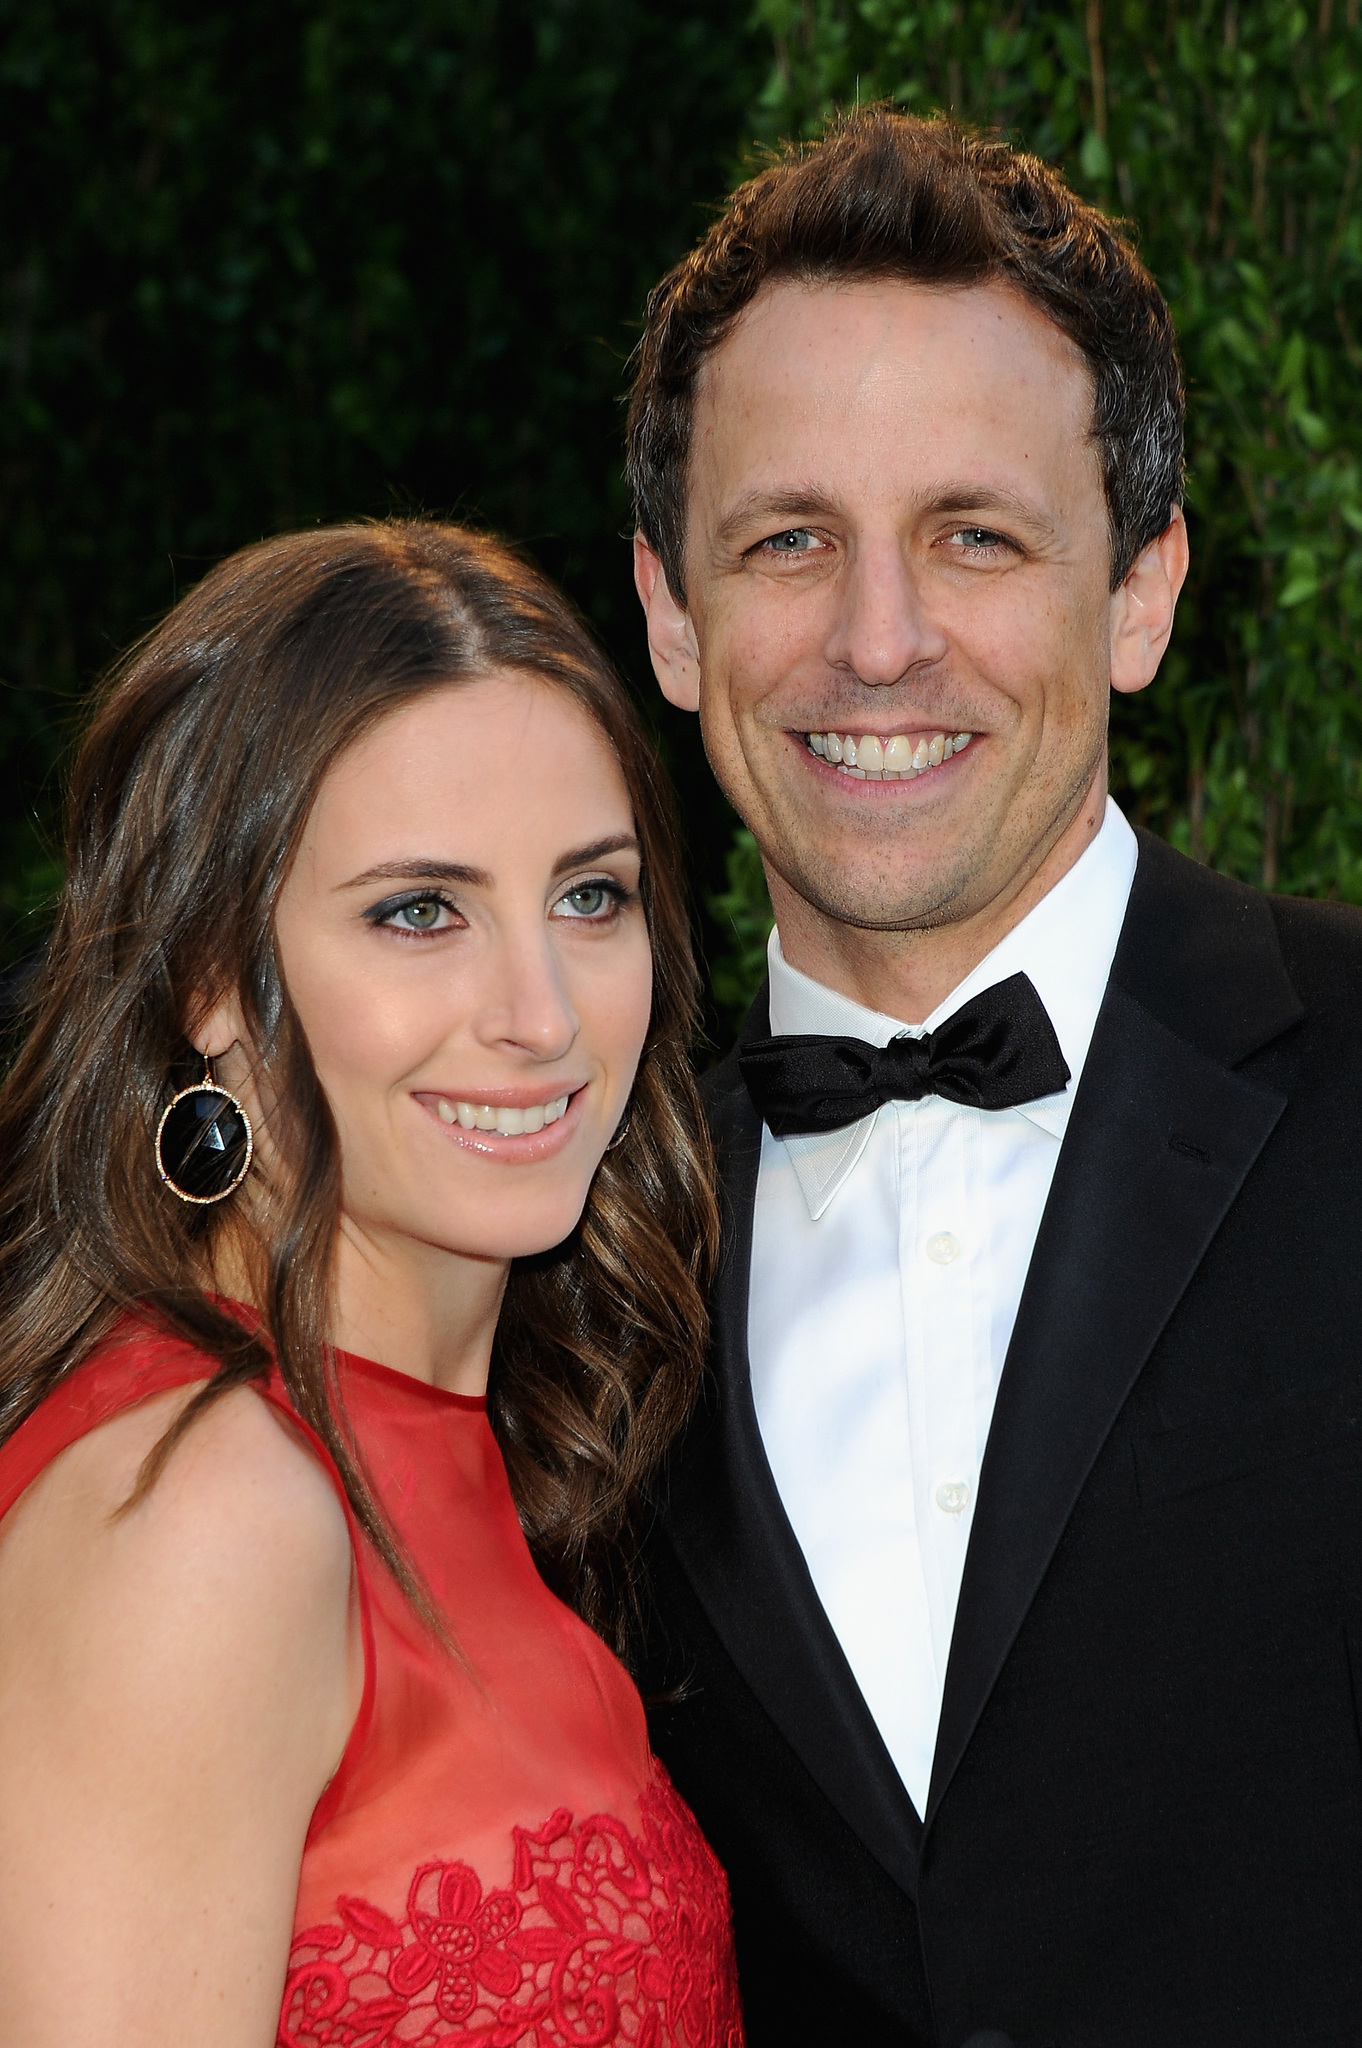 Seth Meyers (R) and Alexi Ashe arrives at the 2013 Vanity Fair Oscar Party hosted by Graydon Carter at Sunset Tower on February 24, 2013 in West Hollywood, California.